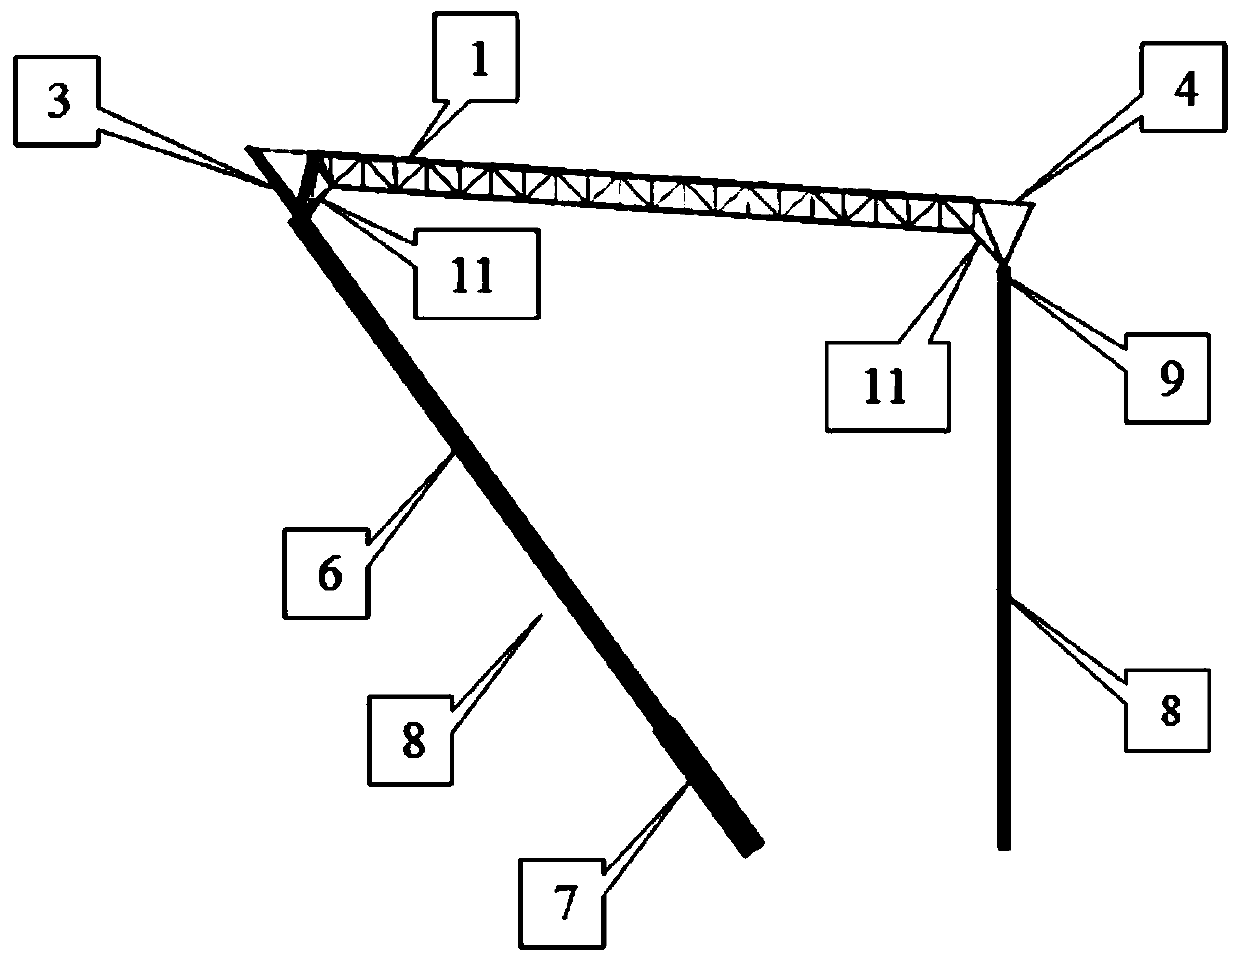 A structure with coupled forces between inclined columns and long-span roofs